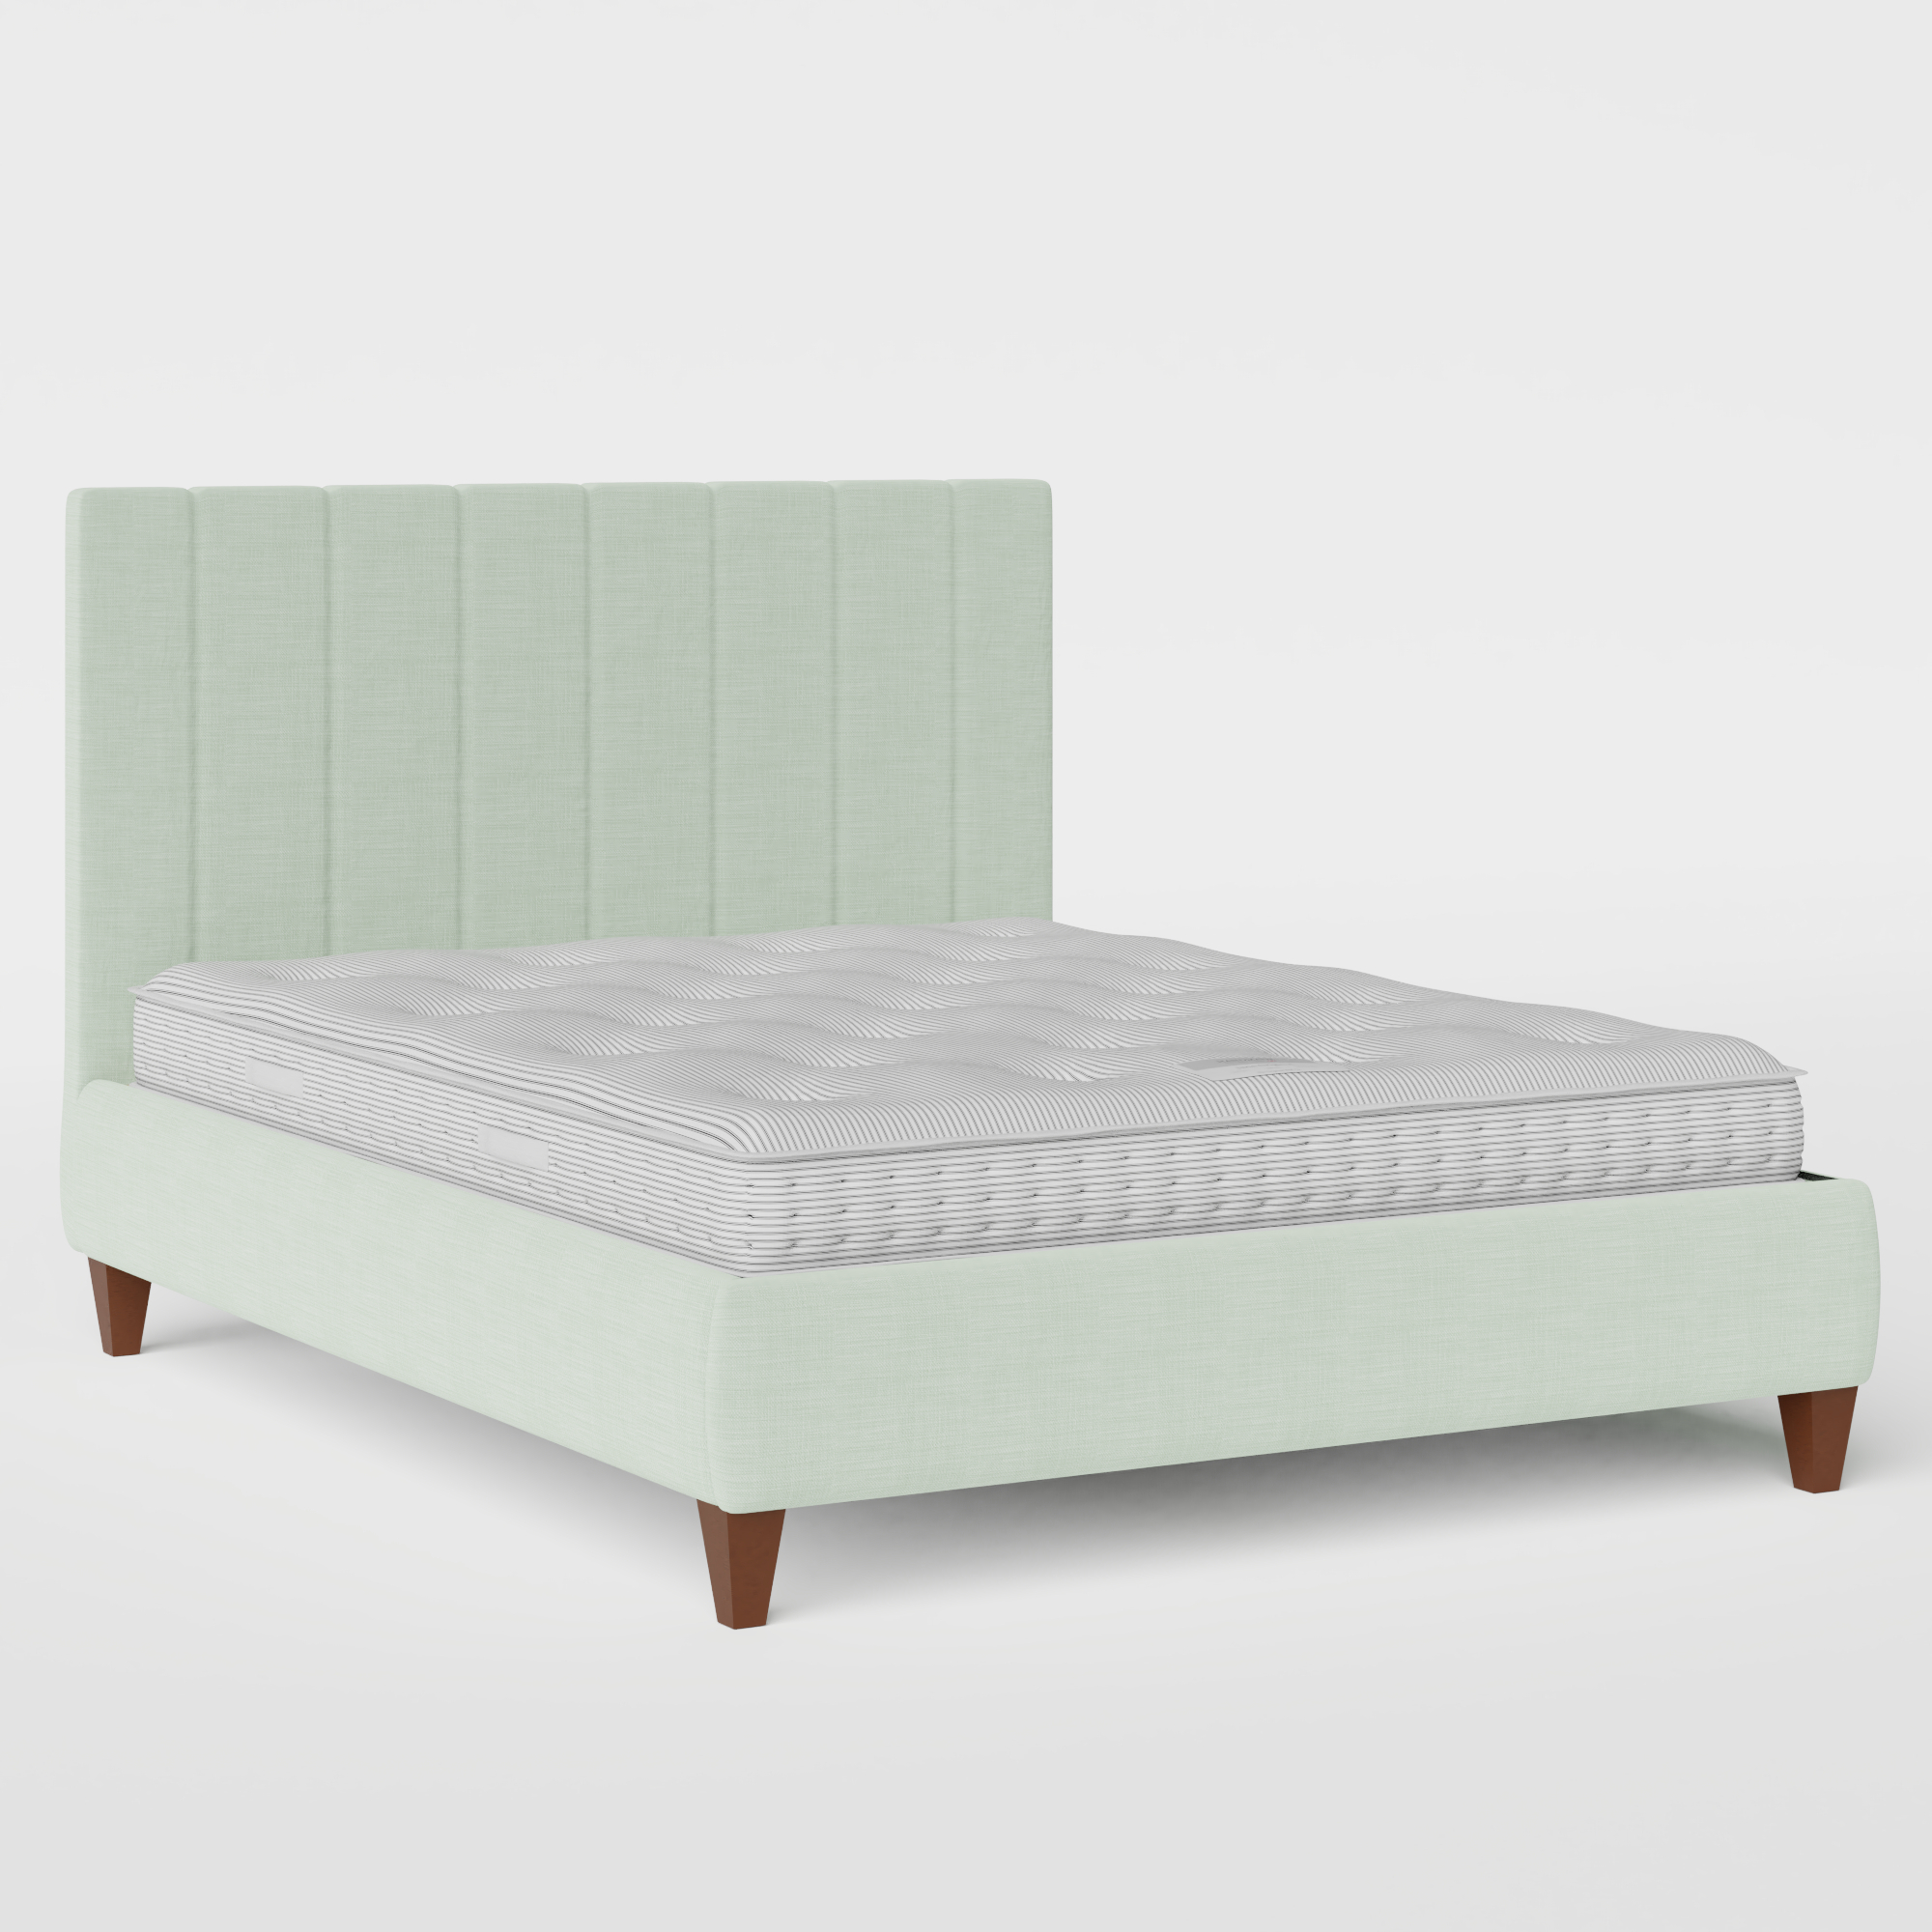 Yushan Pleated upholstered bed in duckegg fabric